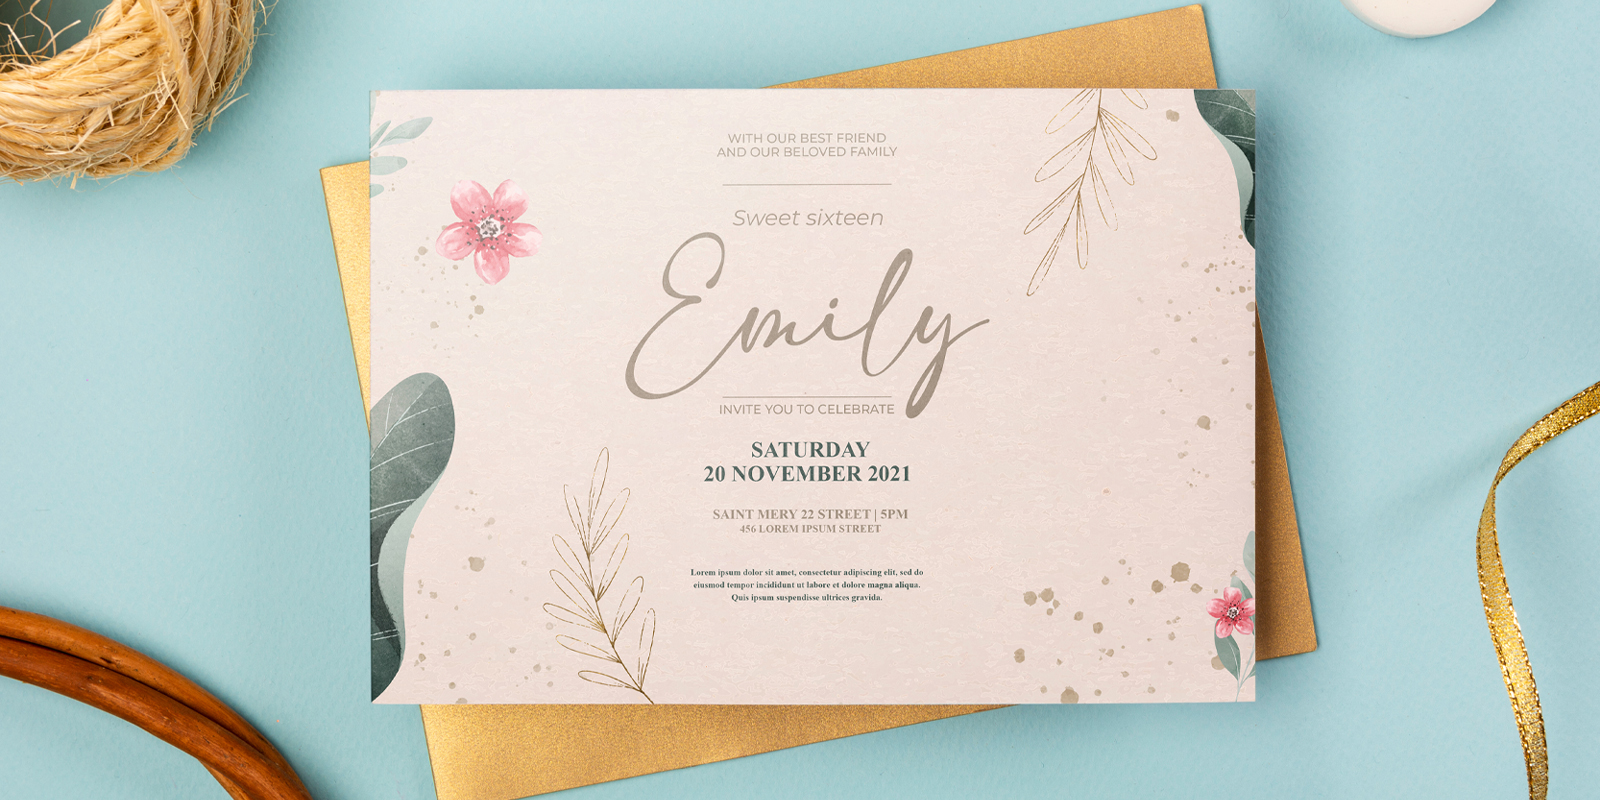 Invitations in Launceston - Print with Pagerr